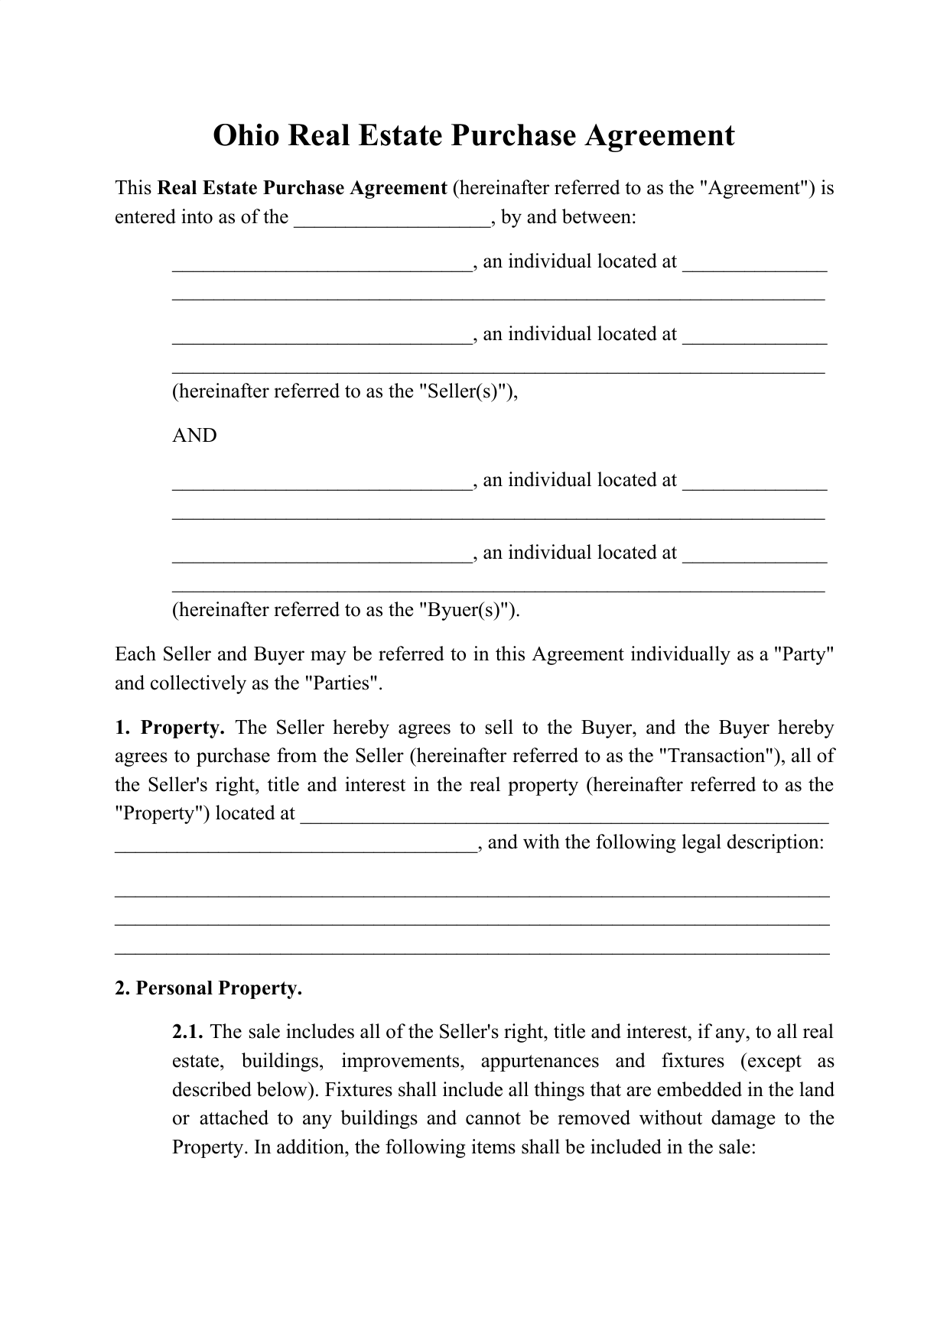 Real Estate Purchase Agreement Template - Ohio, Page 1